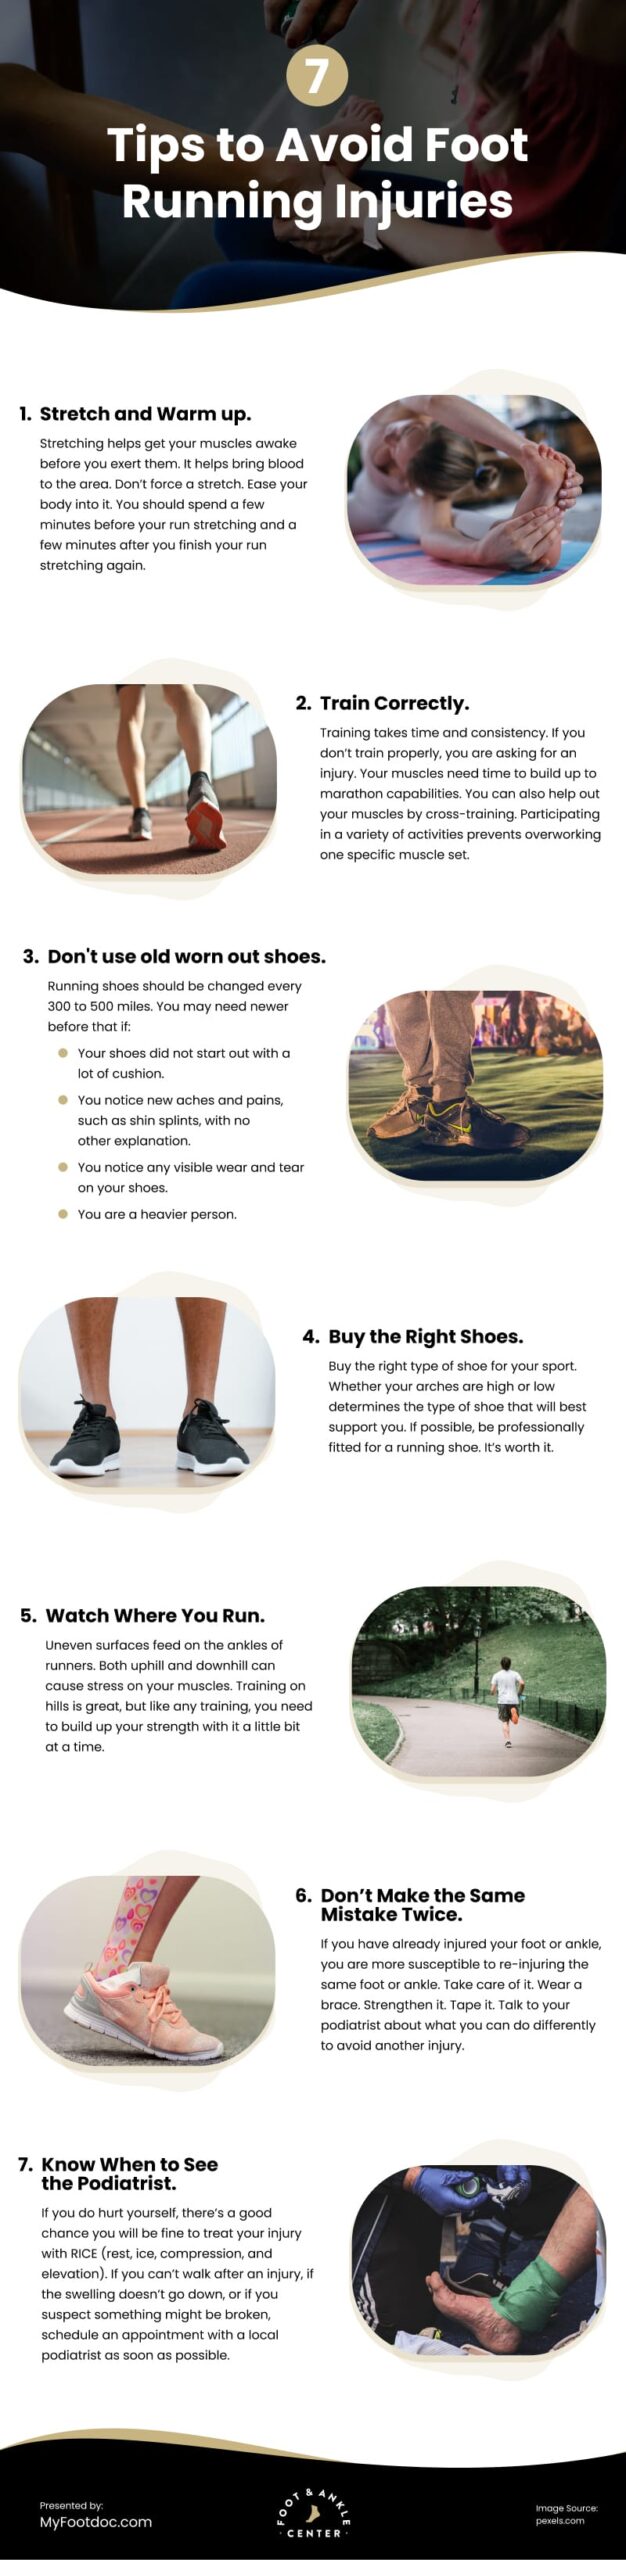 7 Tips to Avoid Foot Running Injuries Infographic